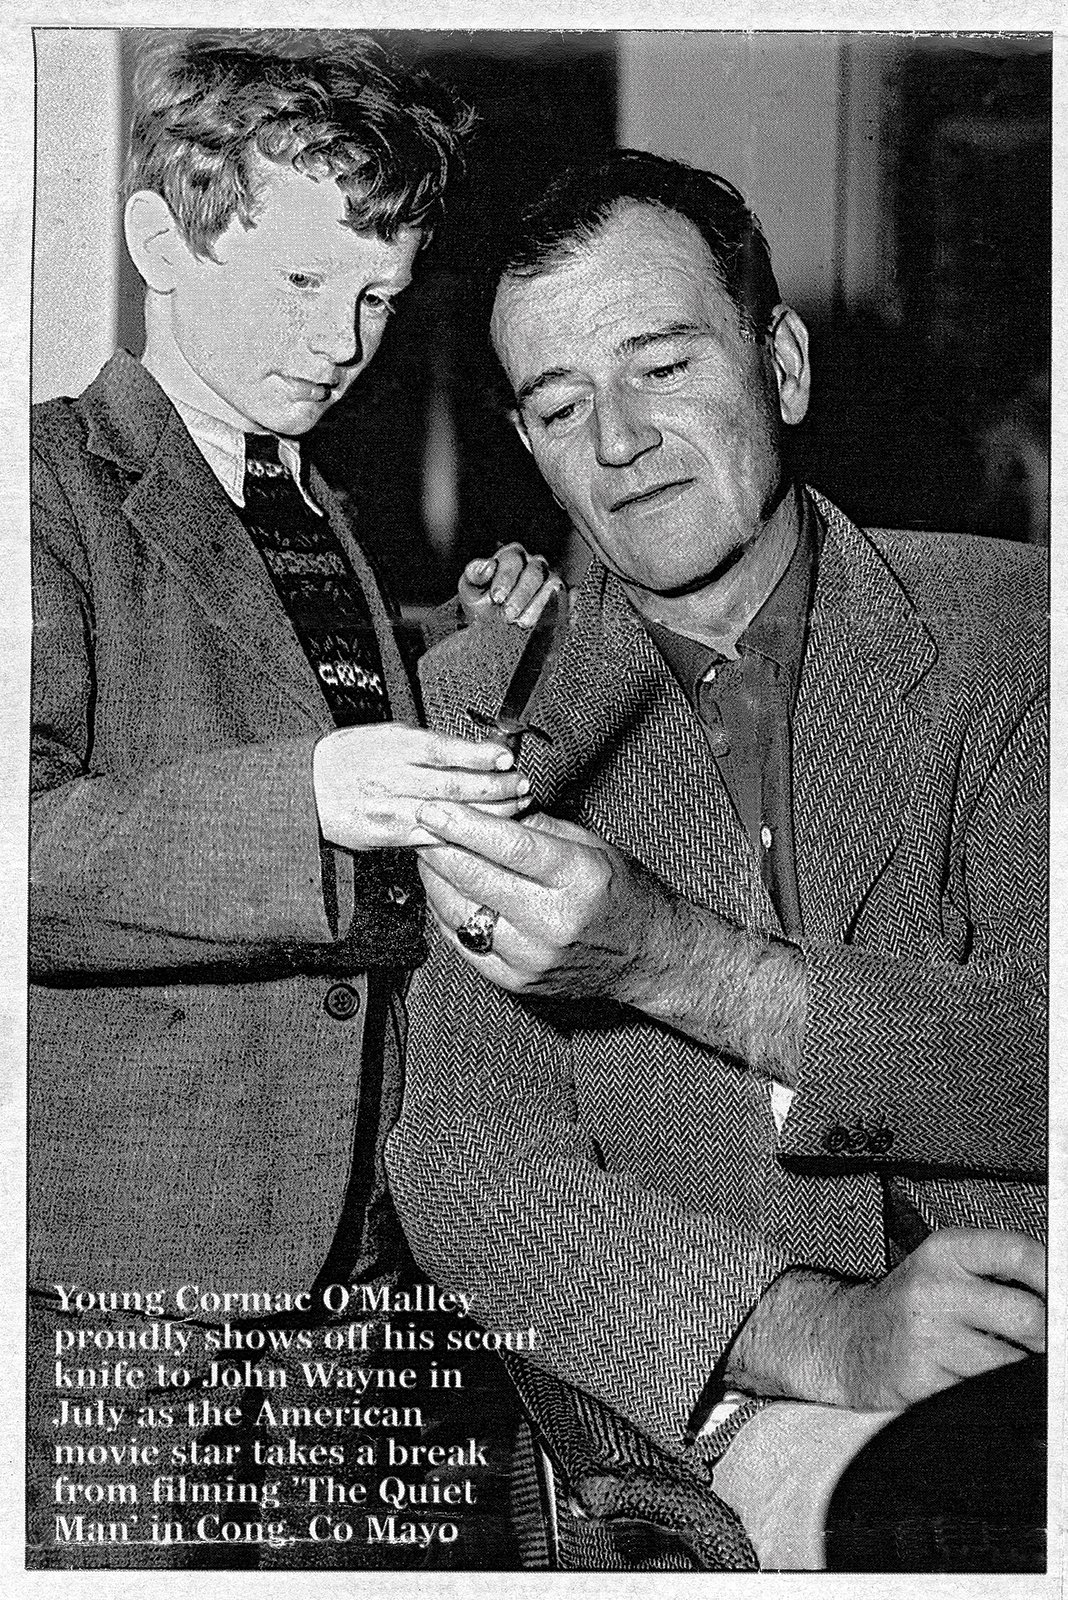 Cormac O’Malley (age 8) shows his scout knife to actor John Wayne on the set of The Quiet Man, County Mayo, 1951.